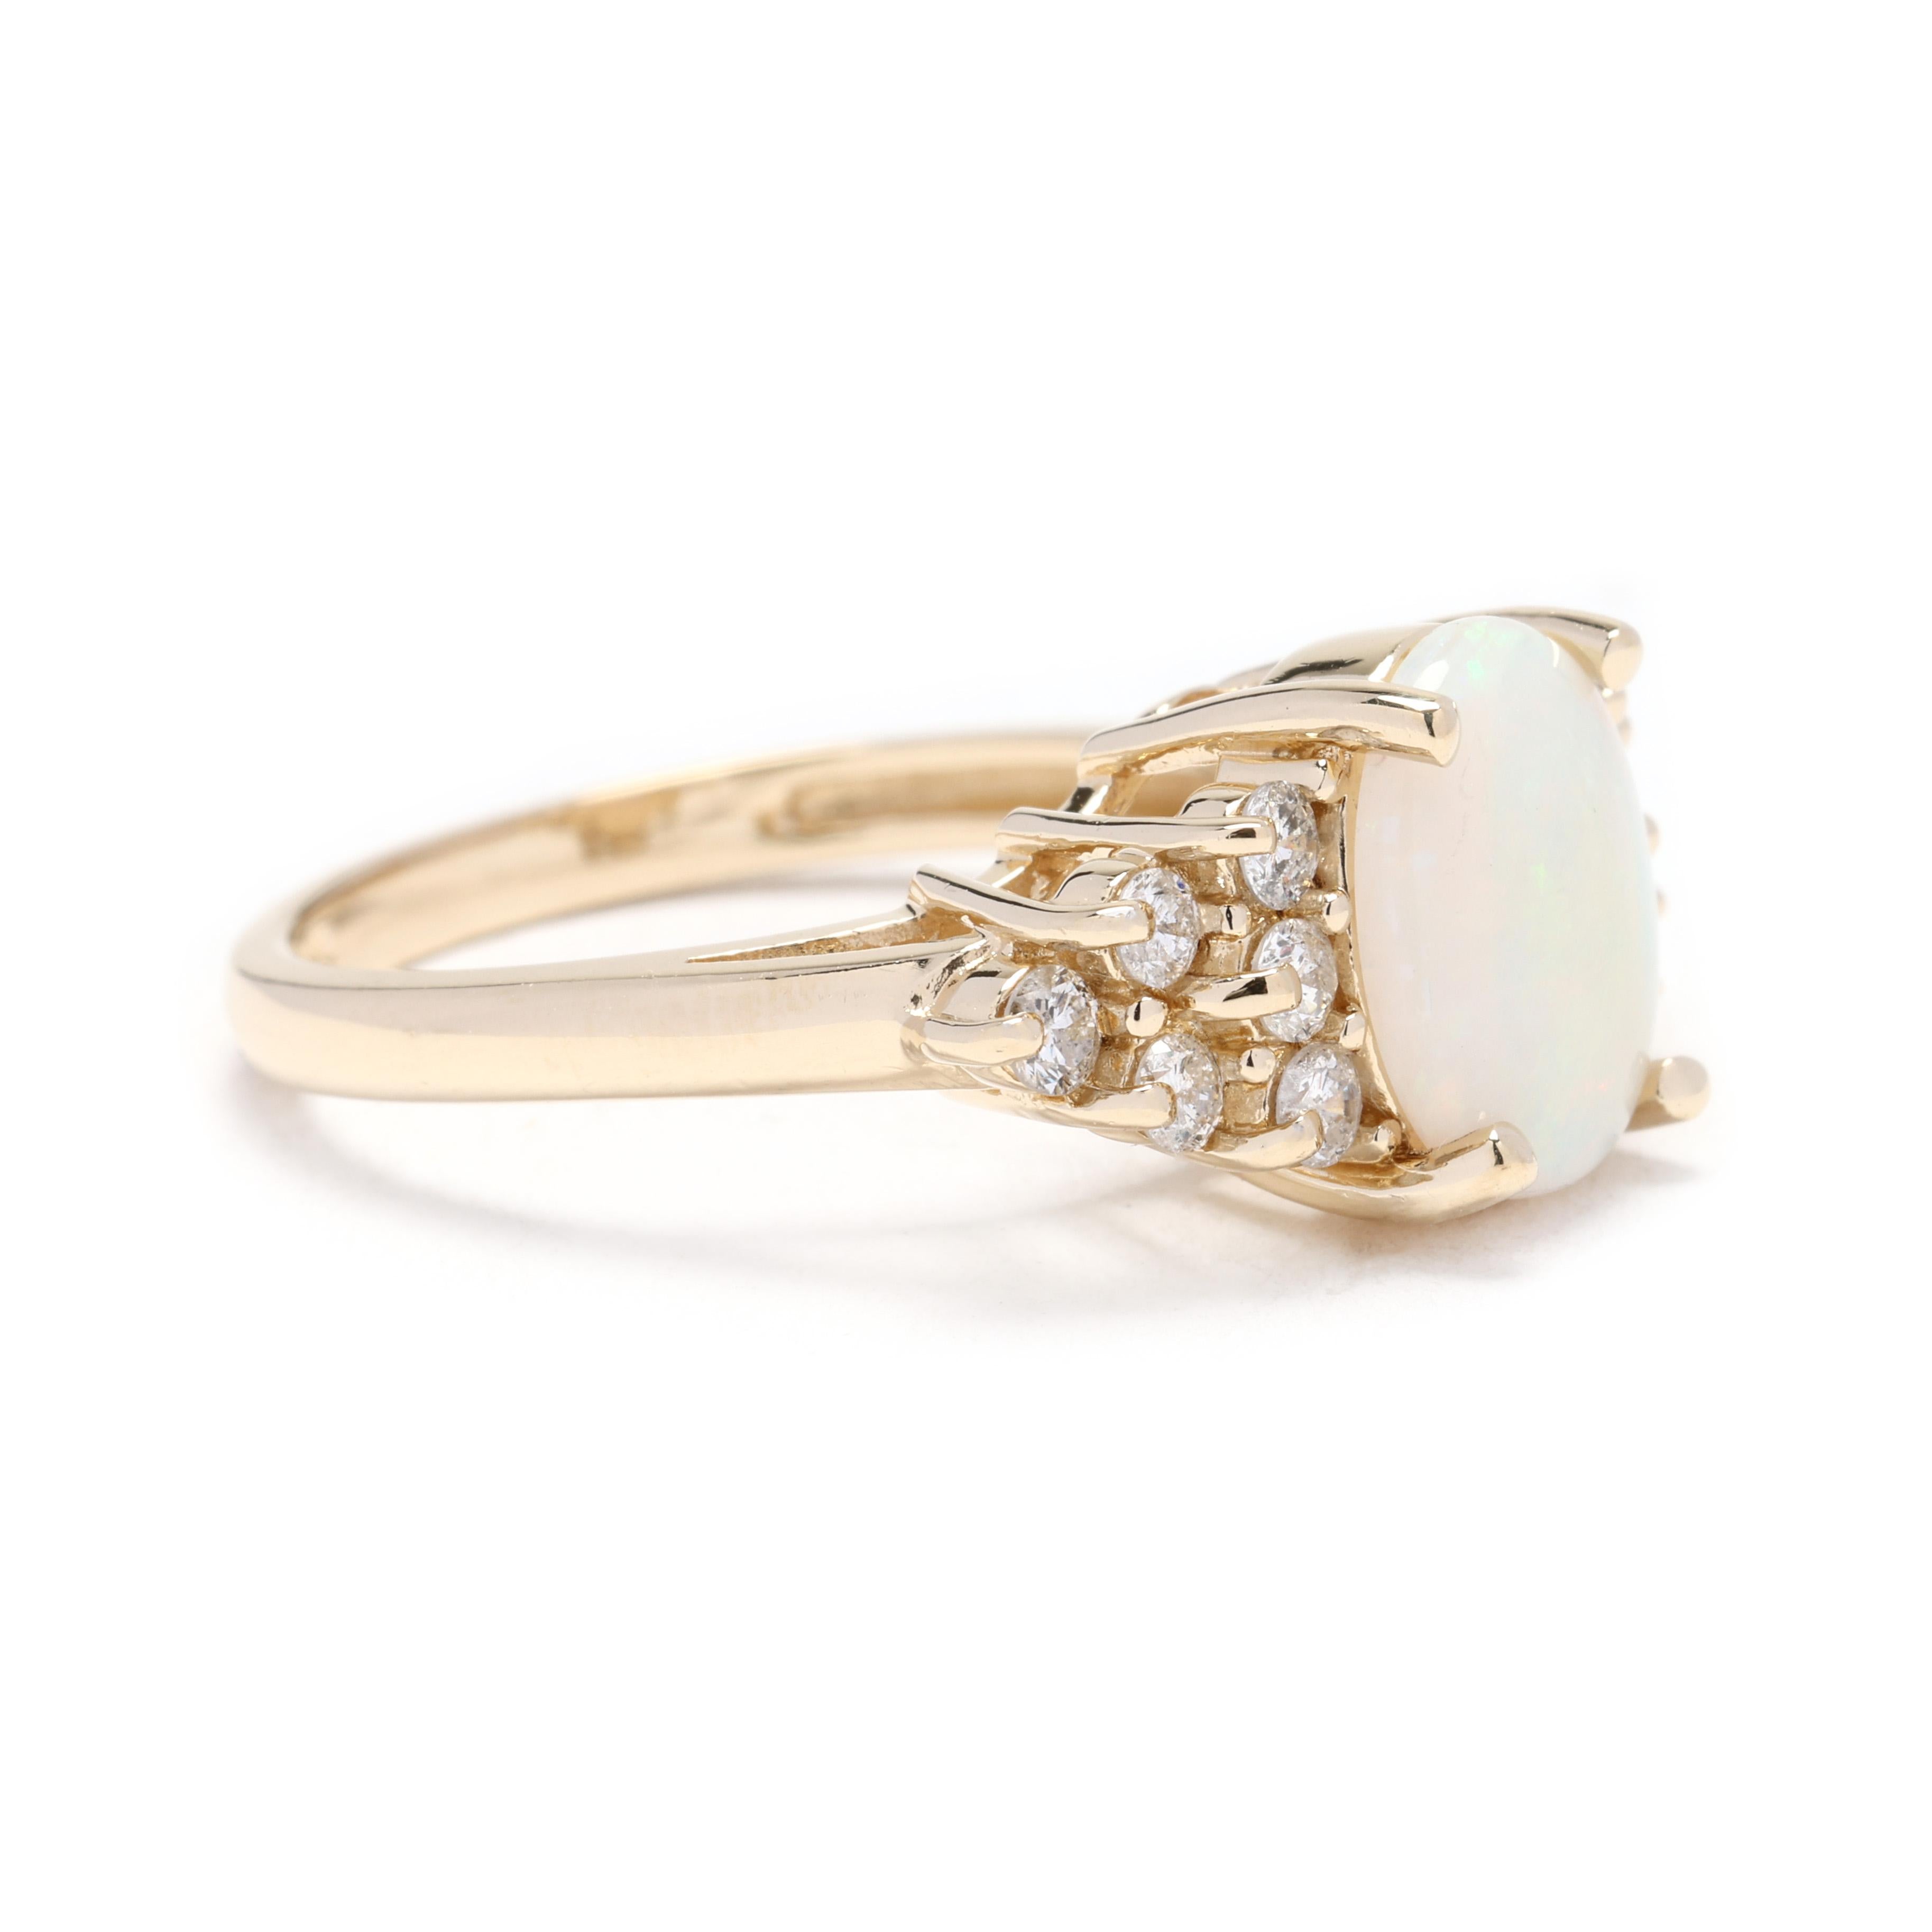 This stunning cluster ring combines the timeless beauty of diamonds with the iridescent allure of opal. Crafted in 14k yellow gold, the ring features a large oval-shaped opal center stone, surrounded by a cluster of diamond gemstones. The opal